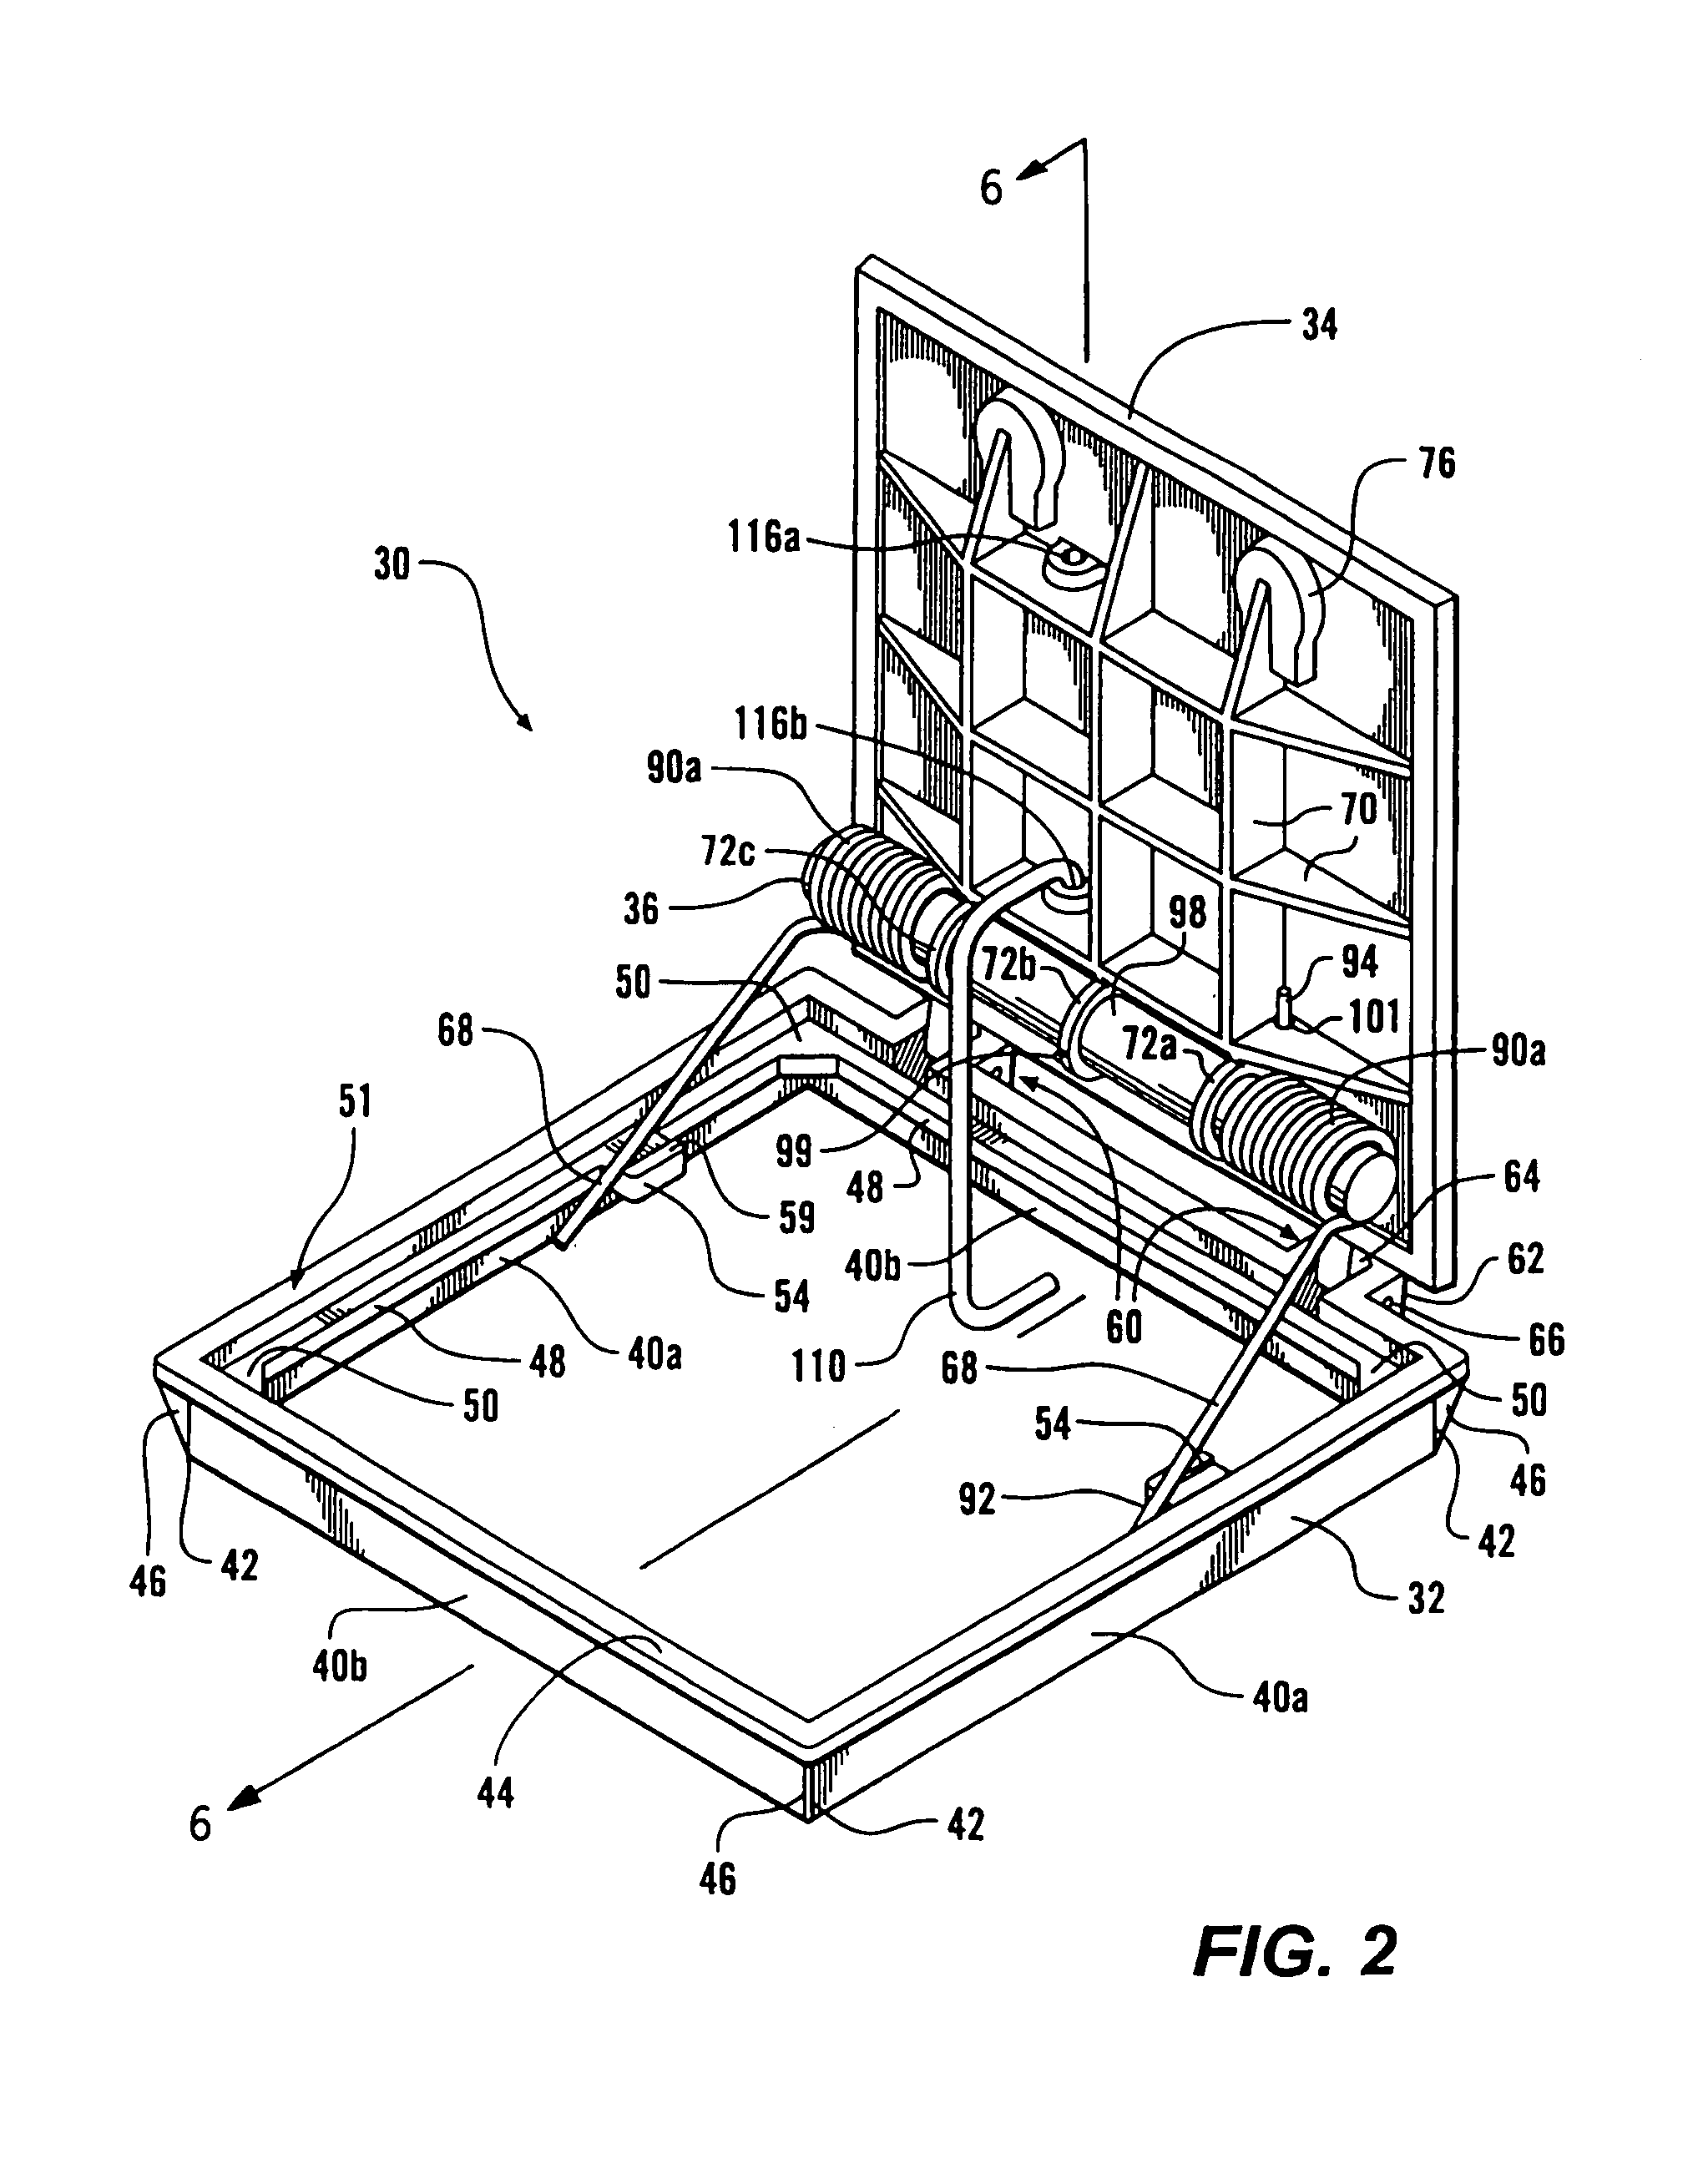 Access hatch cover assembly with lift-assist assembly and method therefor